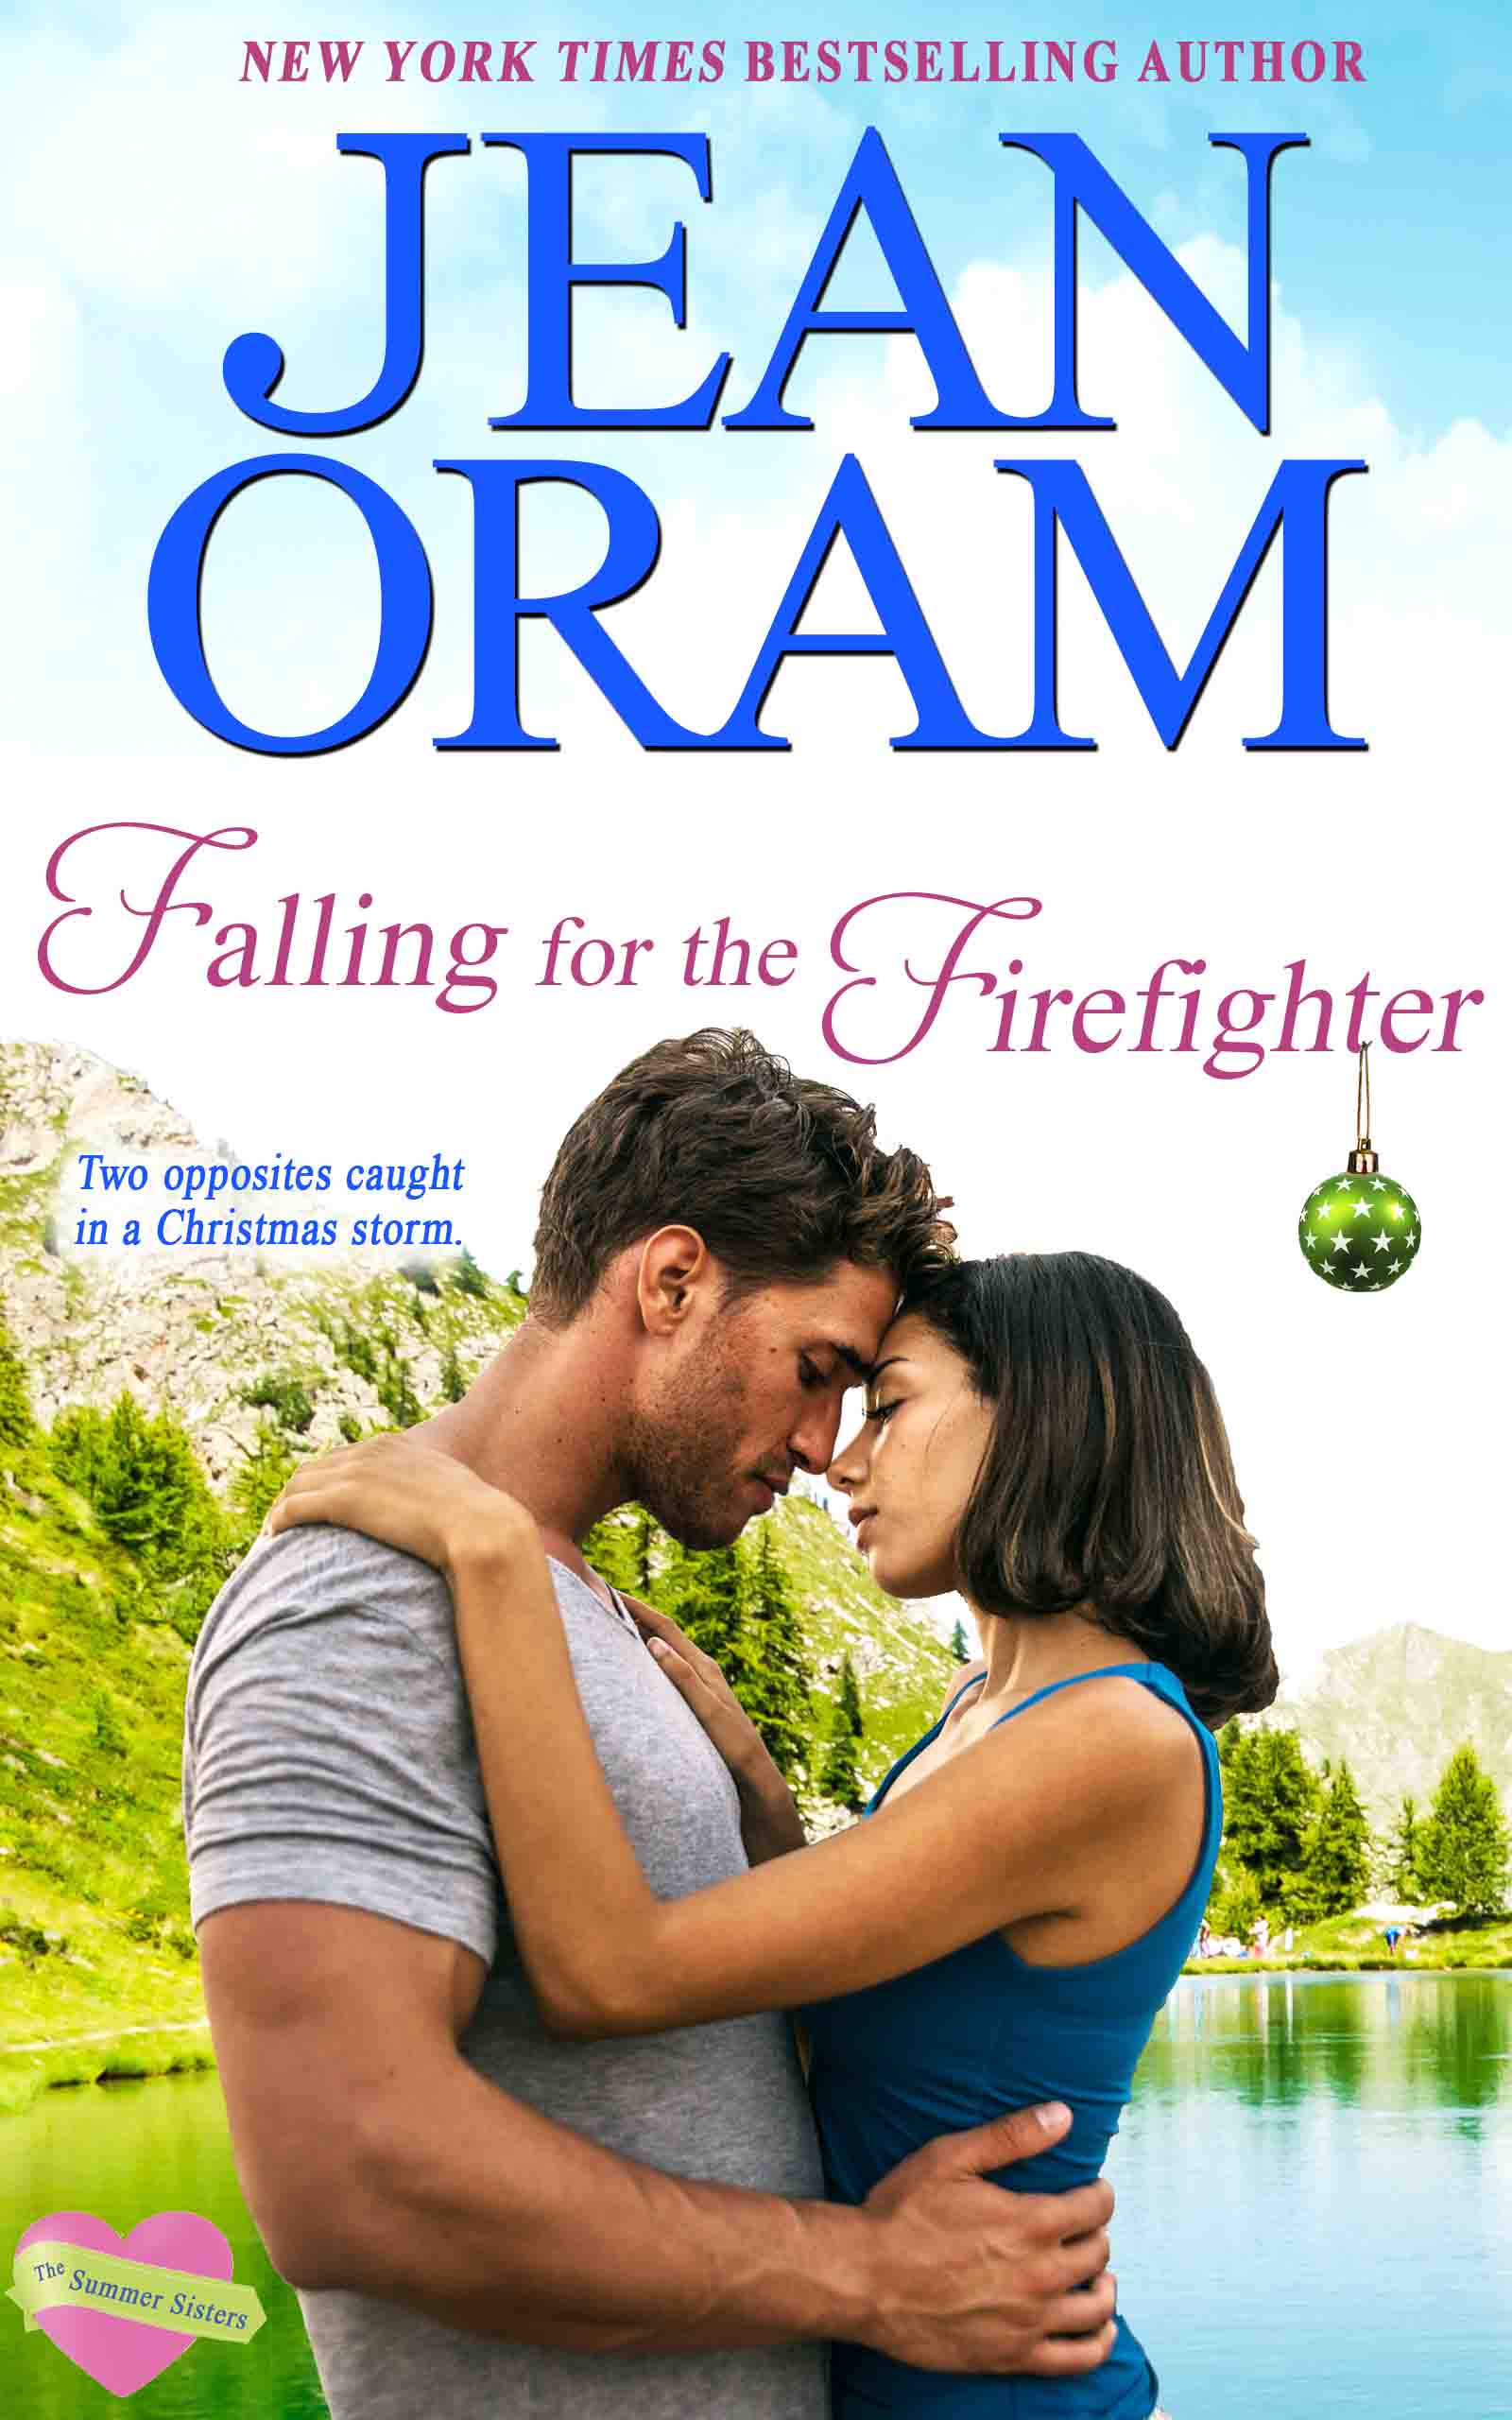 Falling for the Firefighter - Love and Mistletoe by Jean Oram. Irresistible sweet small town romances. The Summer Sisters Christmas sweet romance.